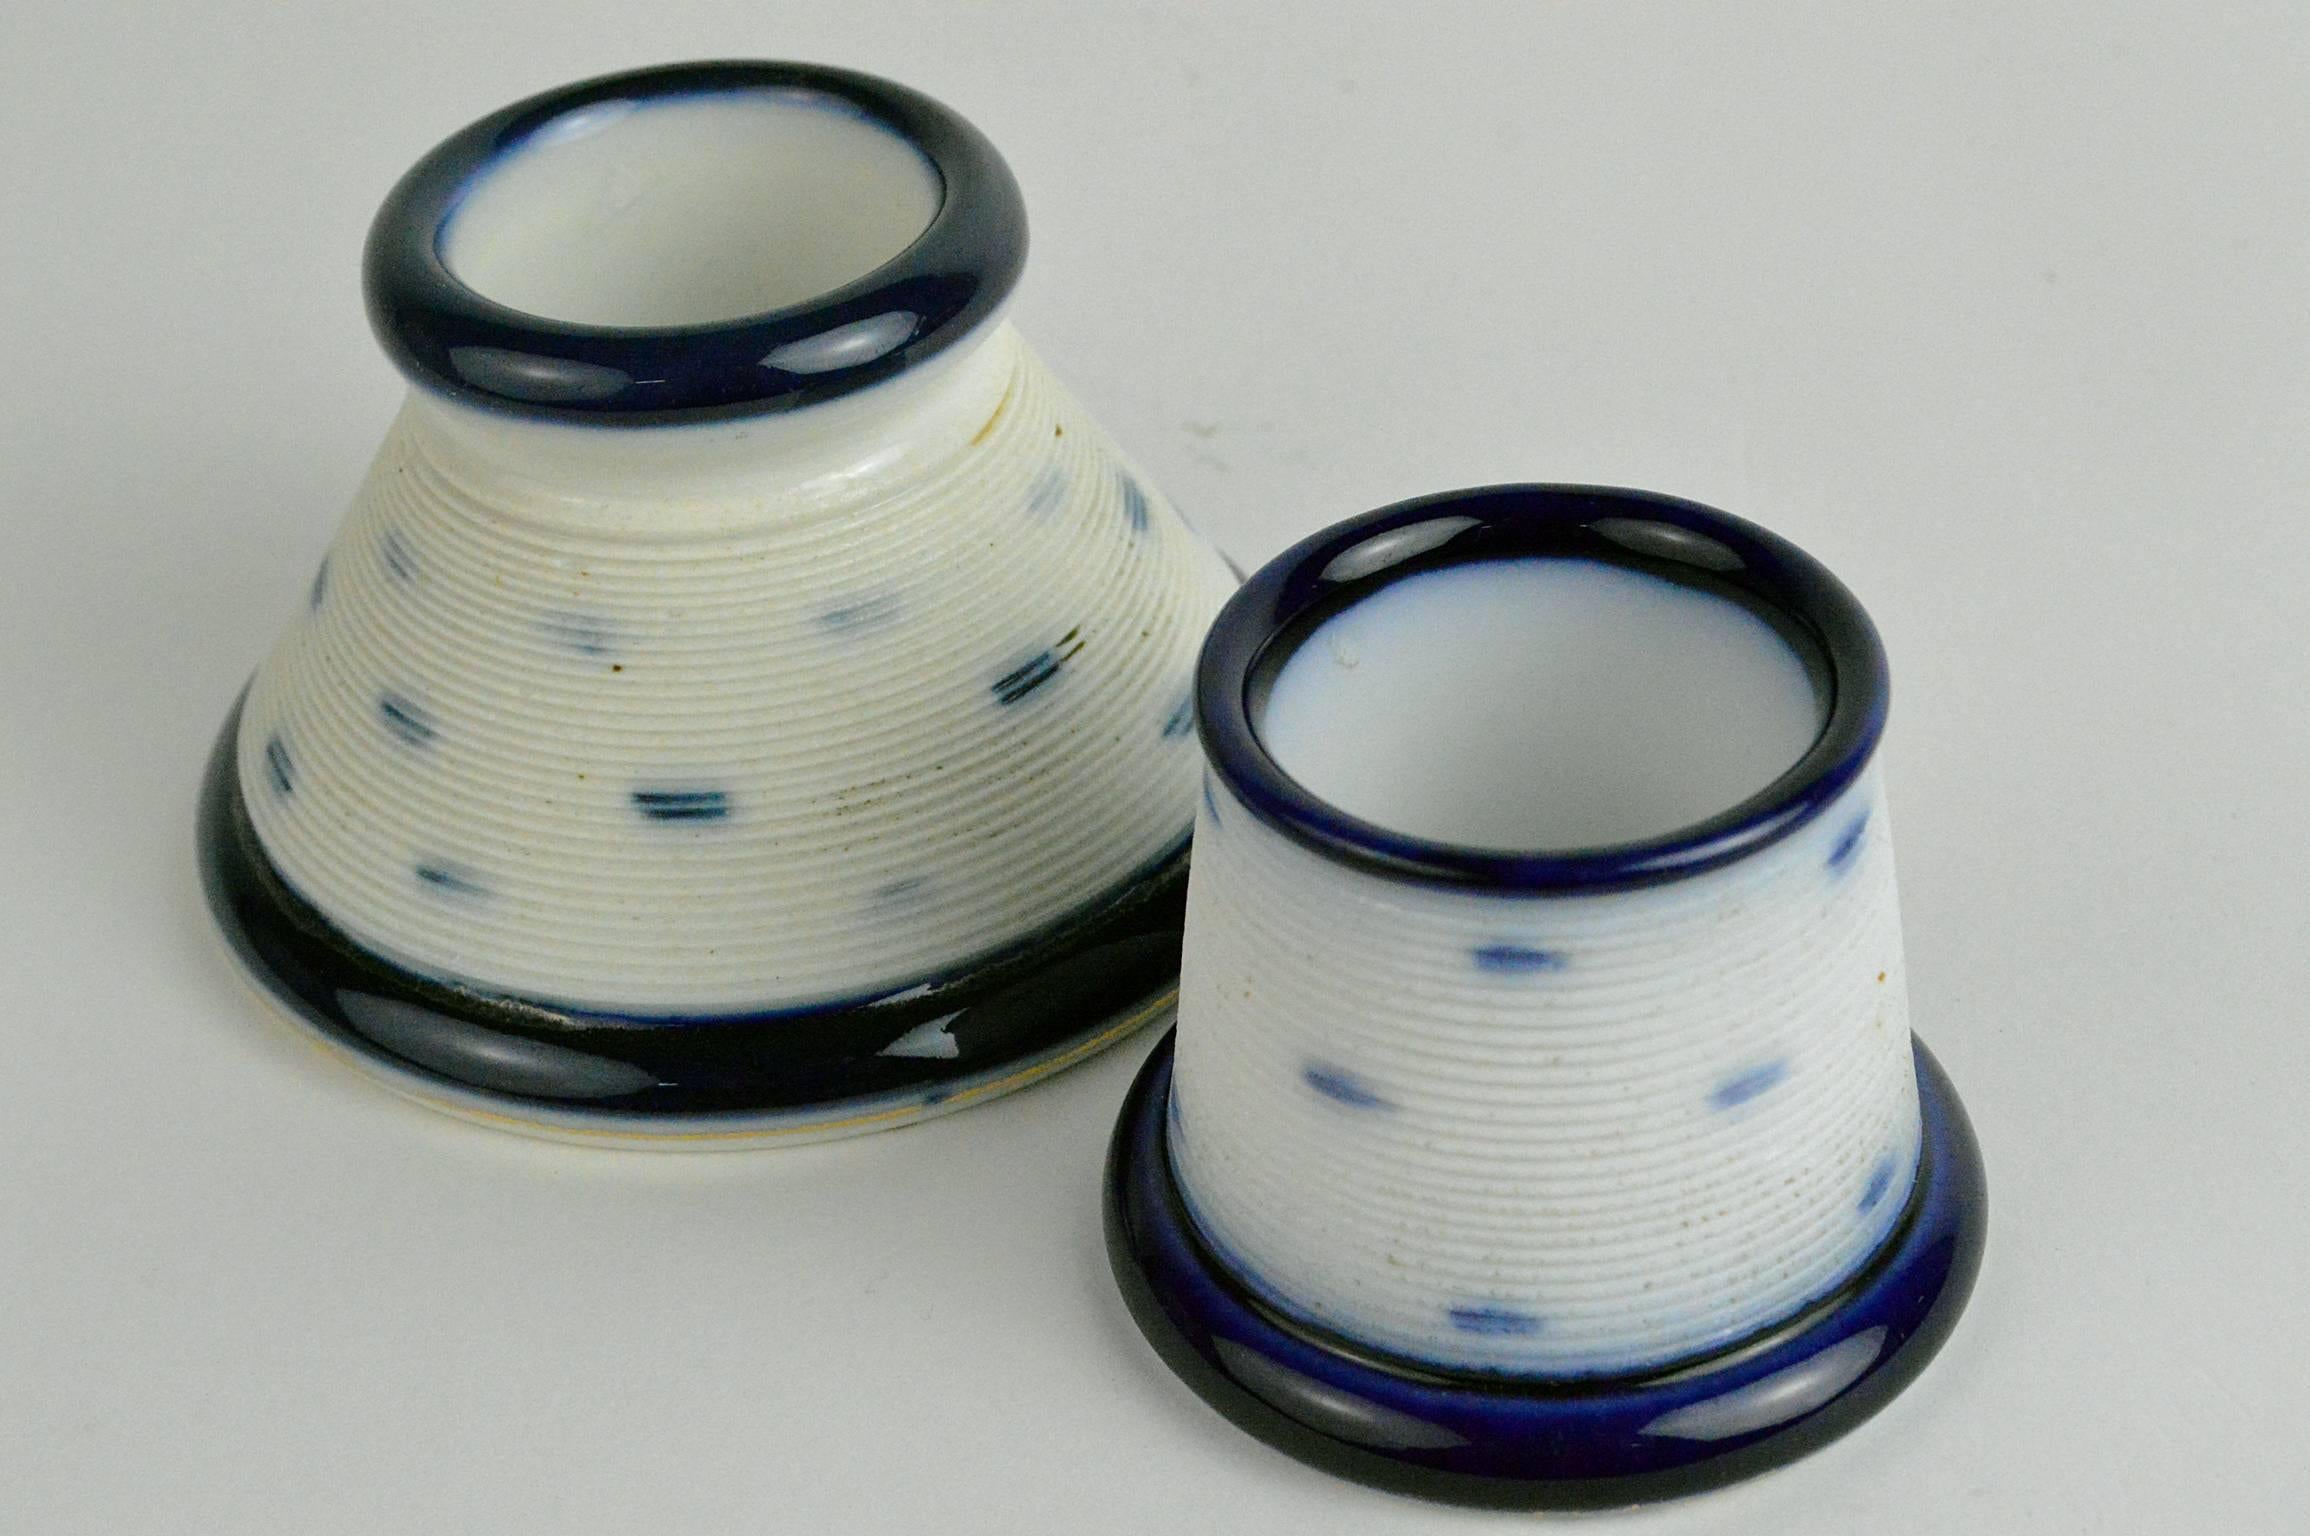 Porcelain match strikers holders cobalt blue and white with rigid sides.
Smallest measures 2.25